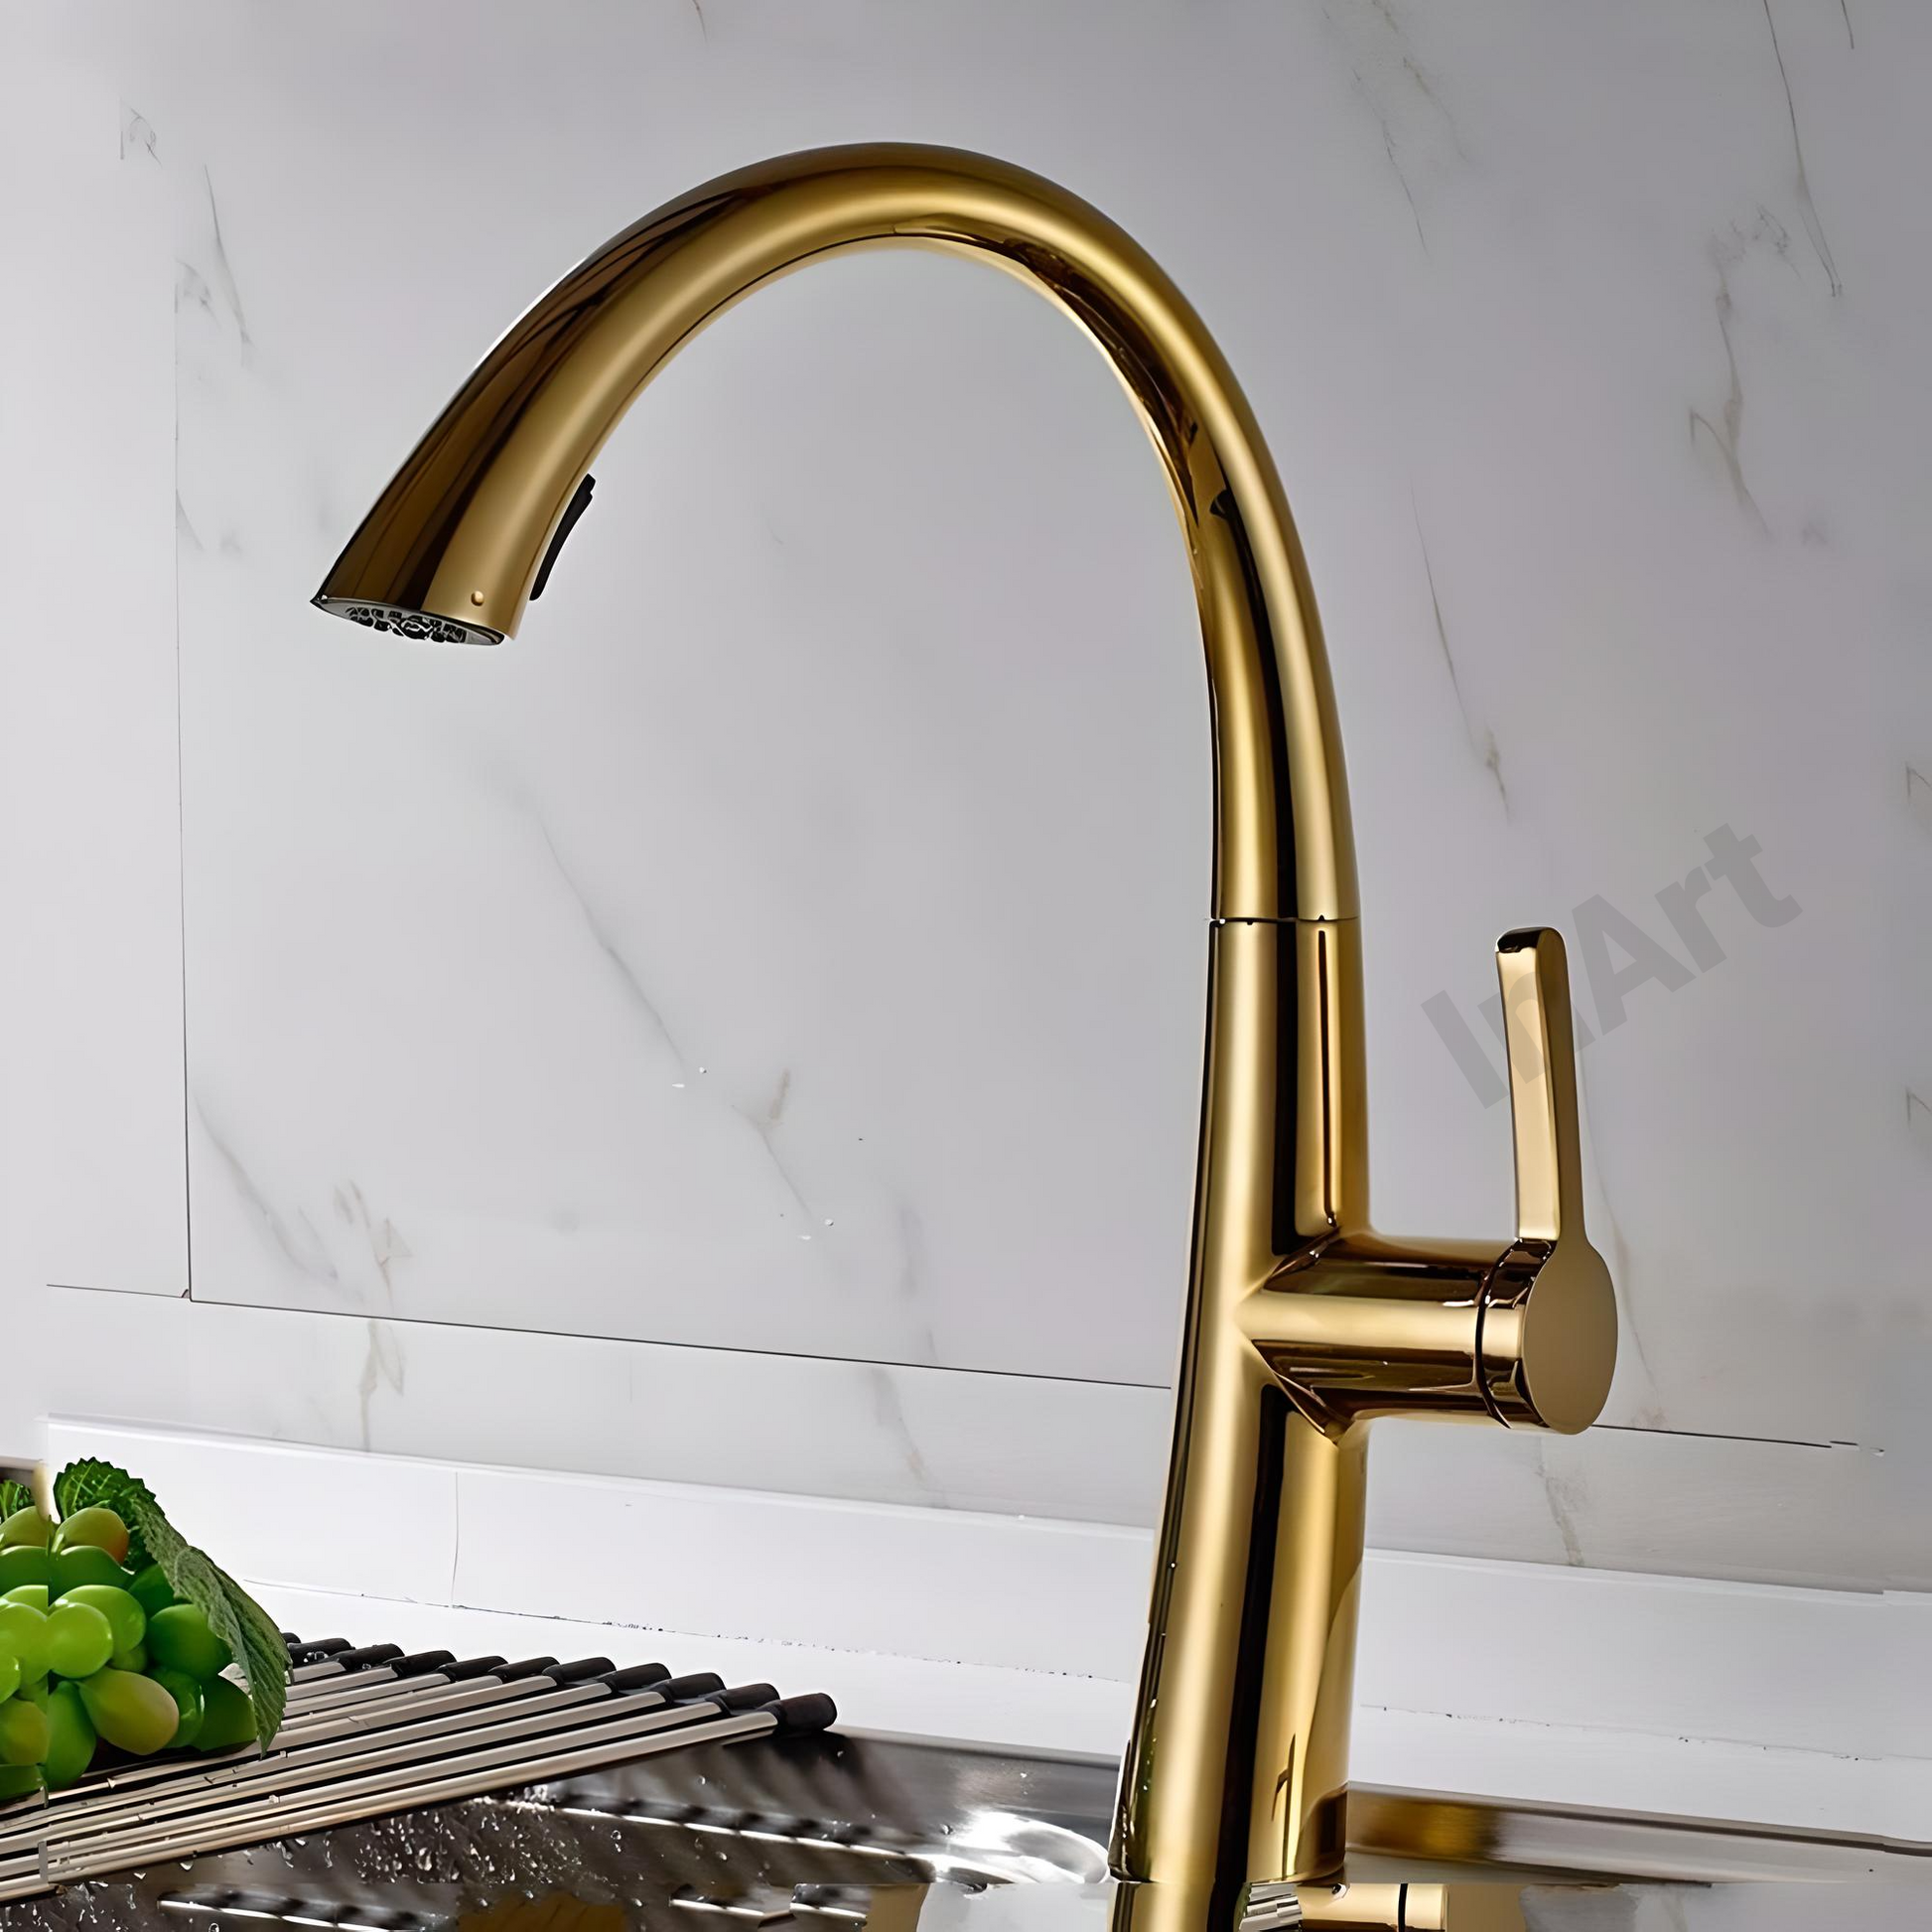 InArt Gold Stainless Steel Kitchen Sink Mixer with 360° Swivel and Pull-Down Spray - Elegant Single Lever Faucet - InArt-Studio